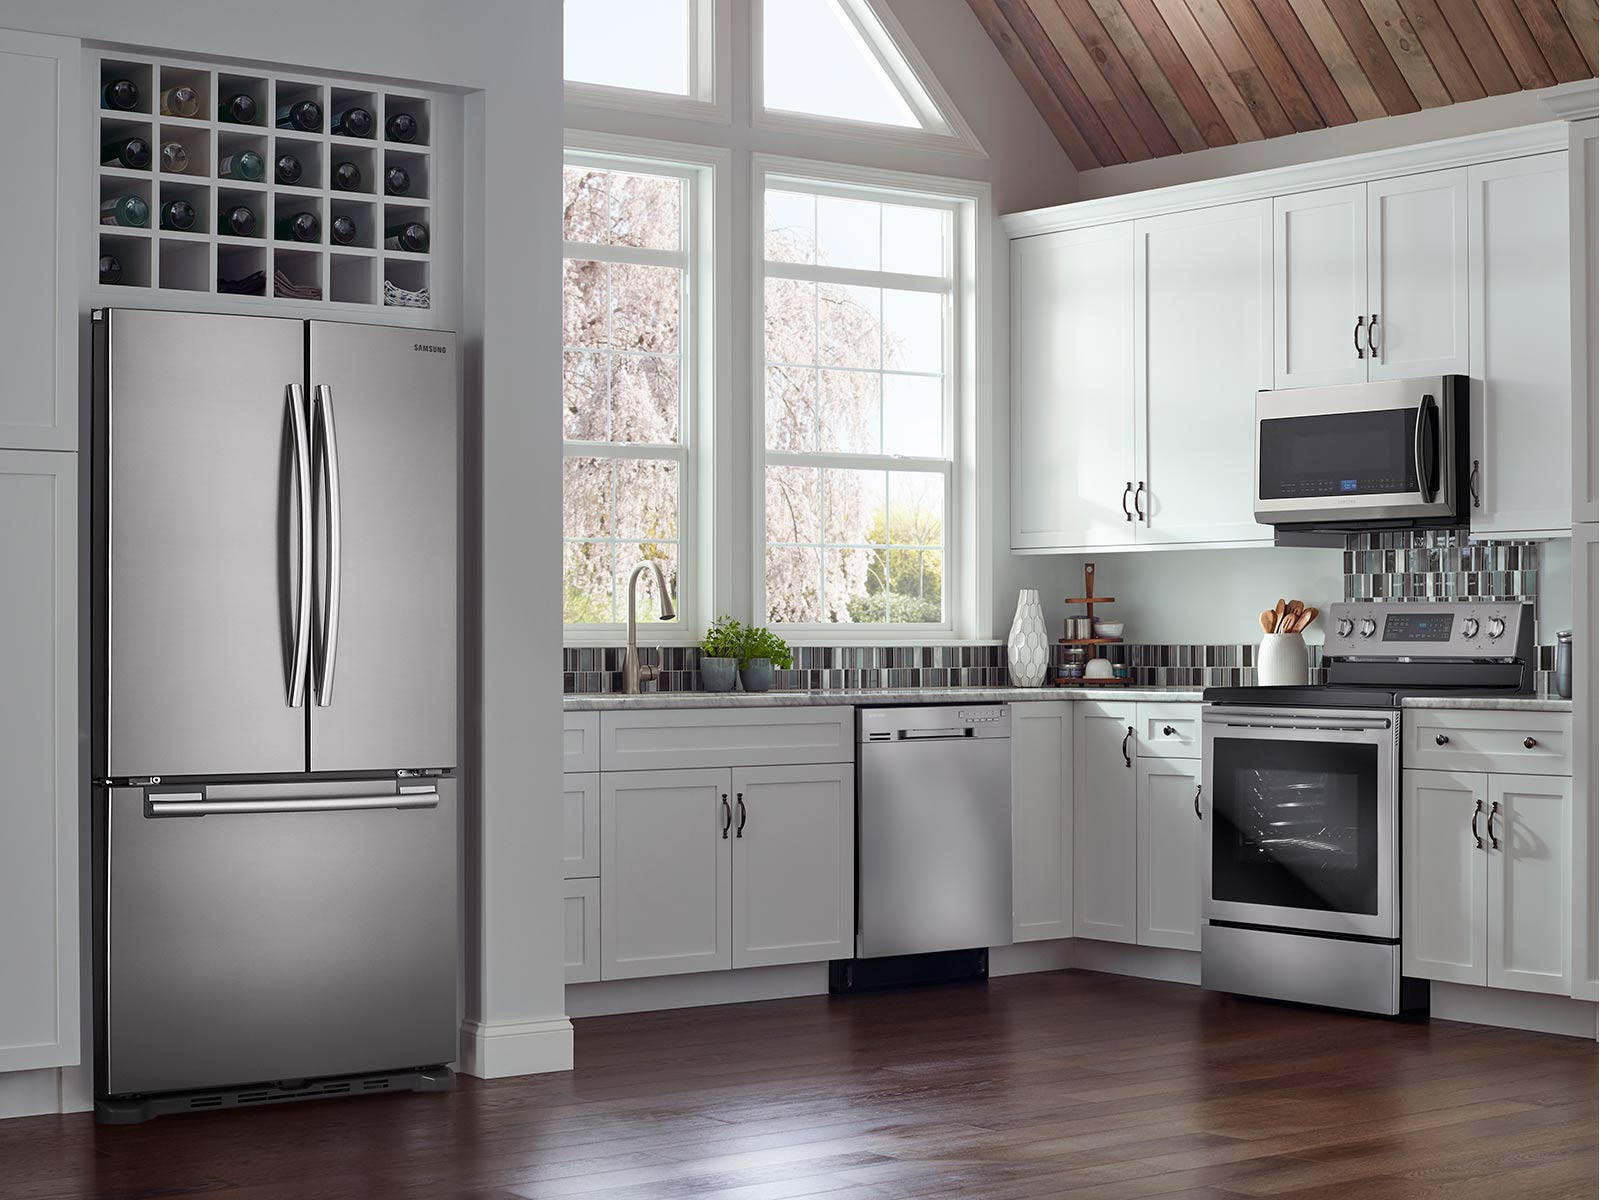 French Door Ovens - Michigan Home and Lifestyle Magazine